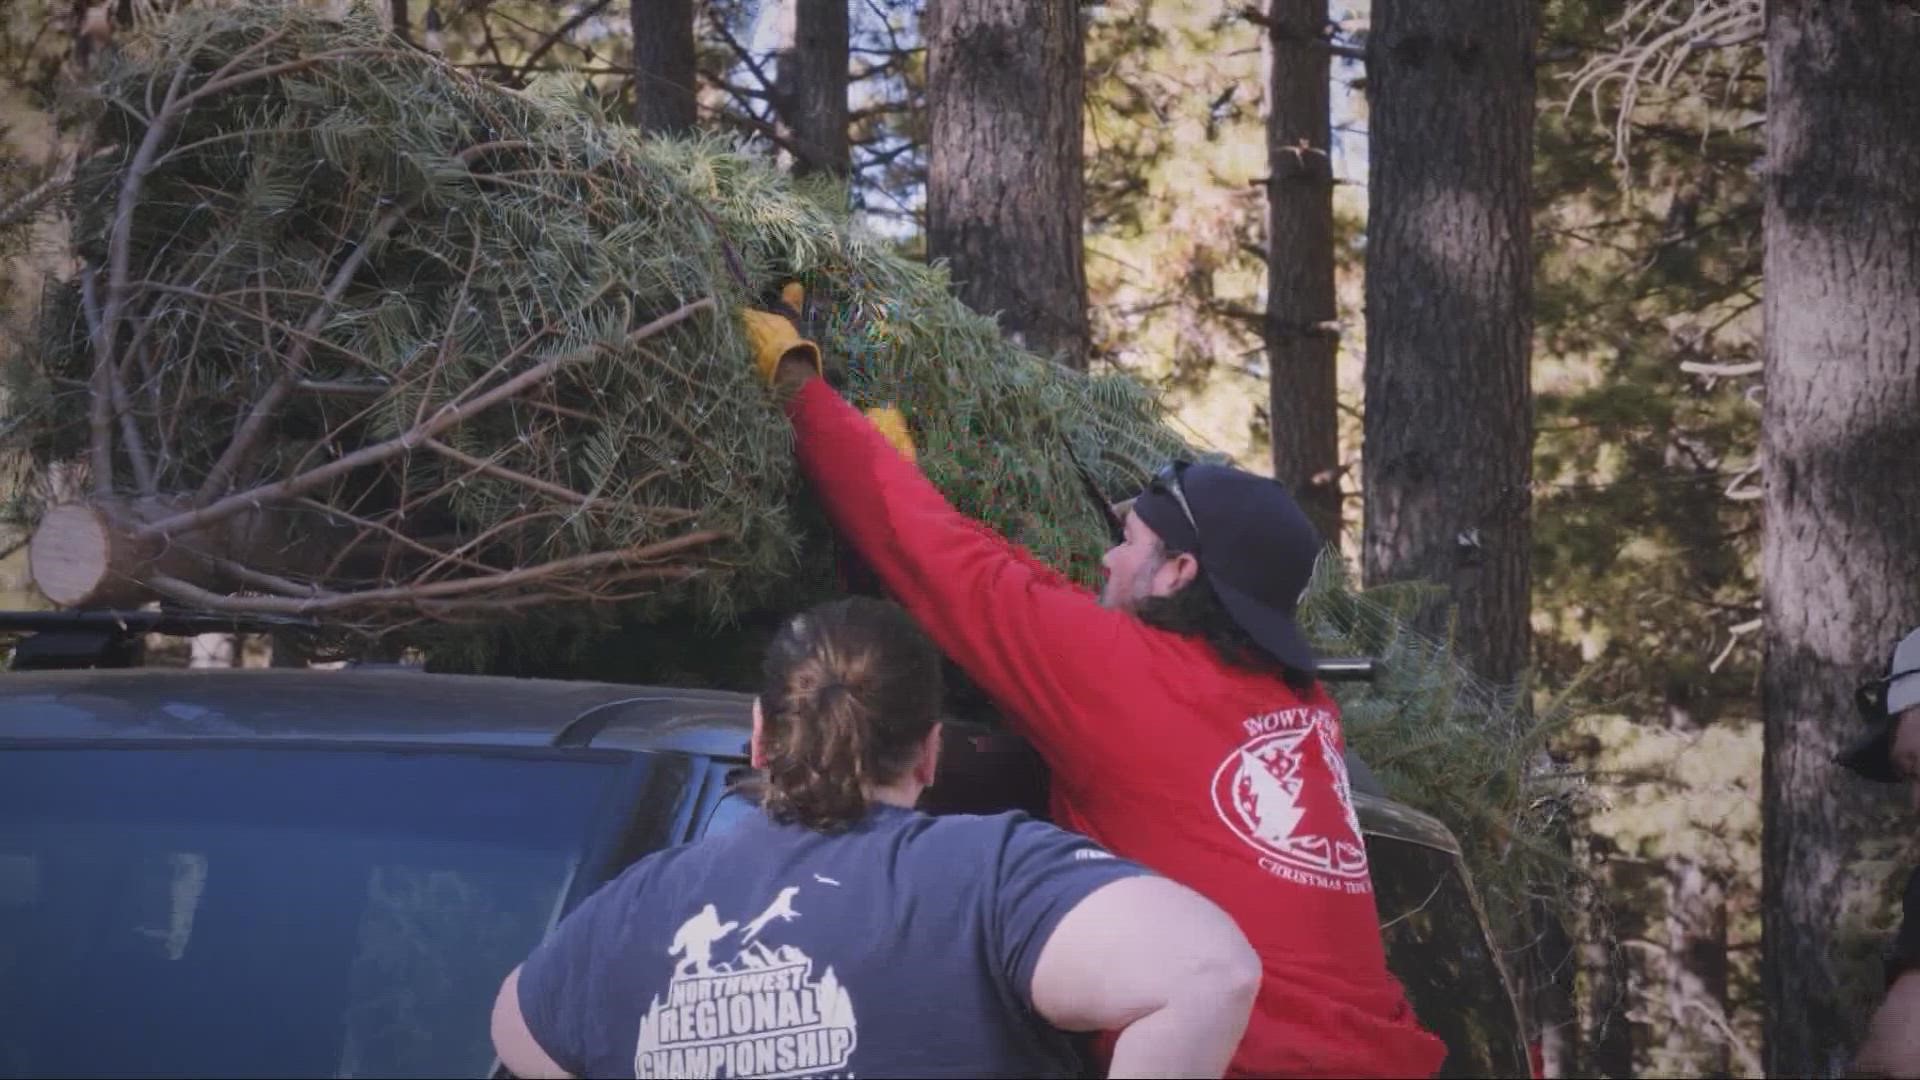 The search for a Christmas Tree is all part of the fun for many families traveling to farms during this year's holiday season.